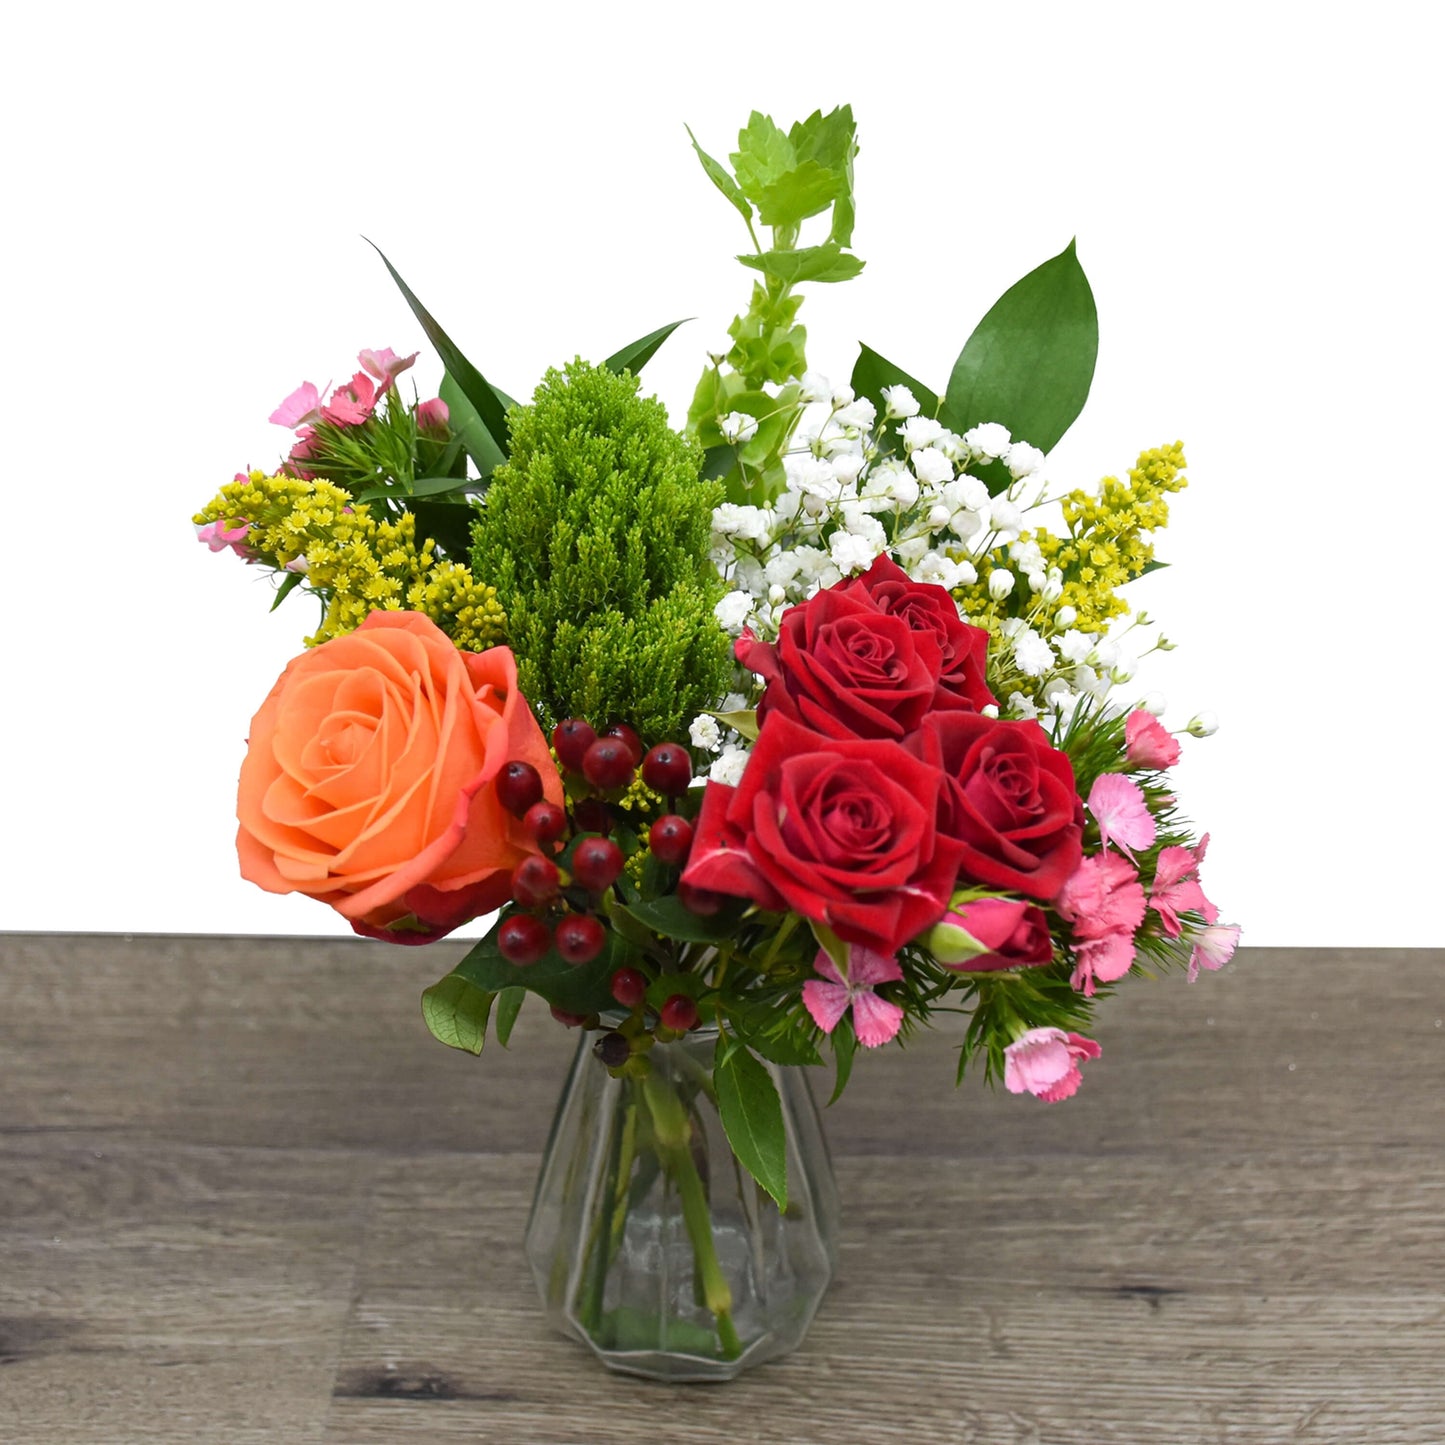 Fresh-Cut Small Mixed Flower Bouquet, Minimum of 12 Stems, Colors Vary